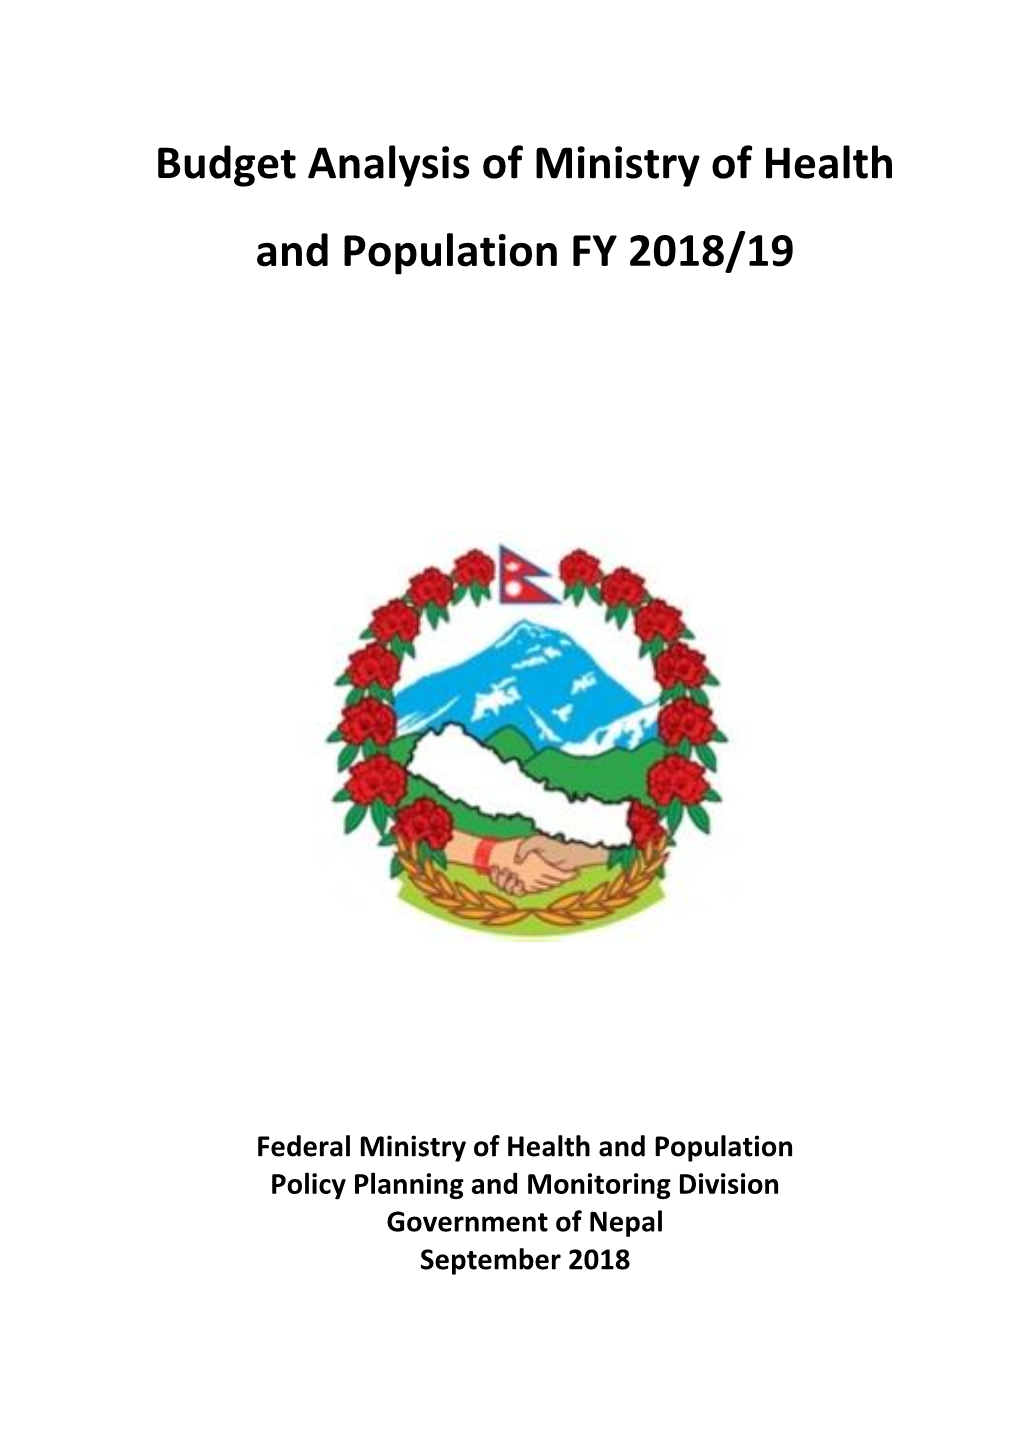 Budget Analysis of Ministry of Health and Population FY 2018/19